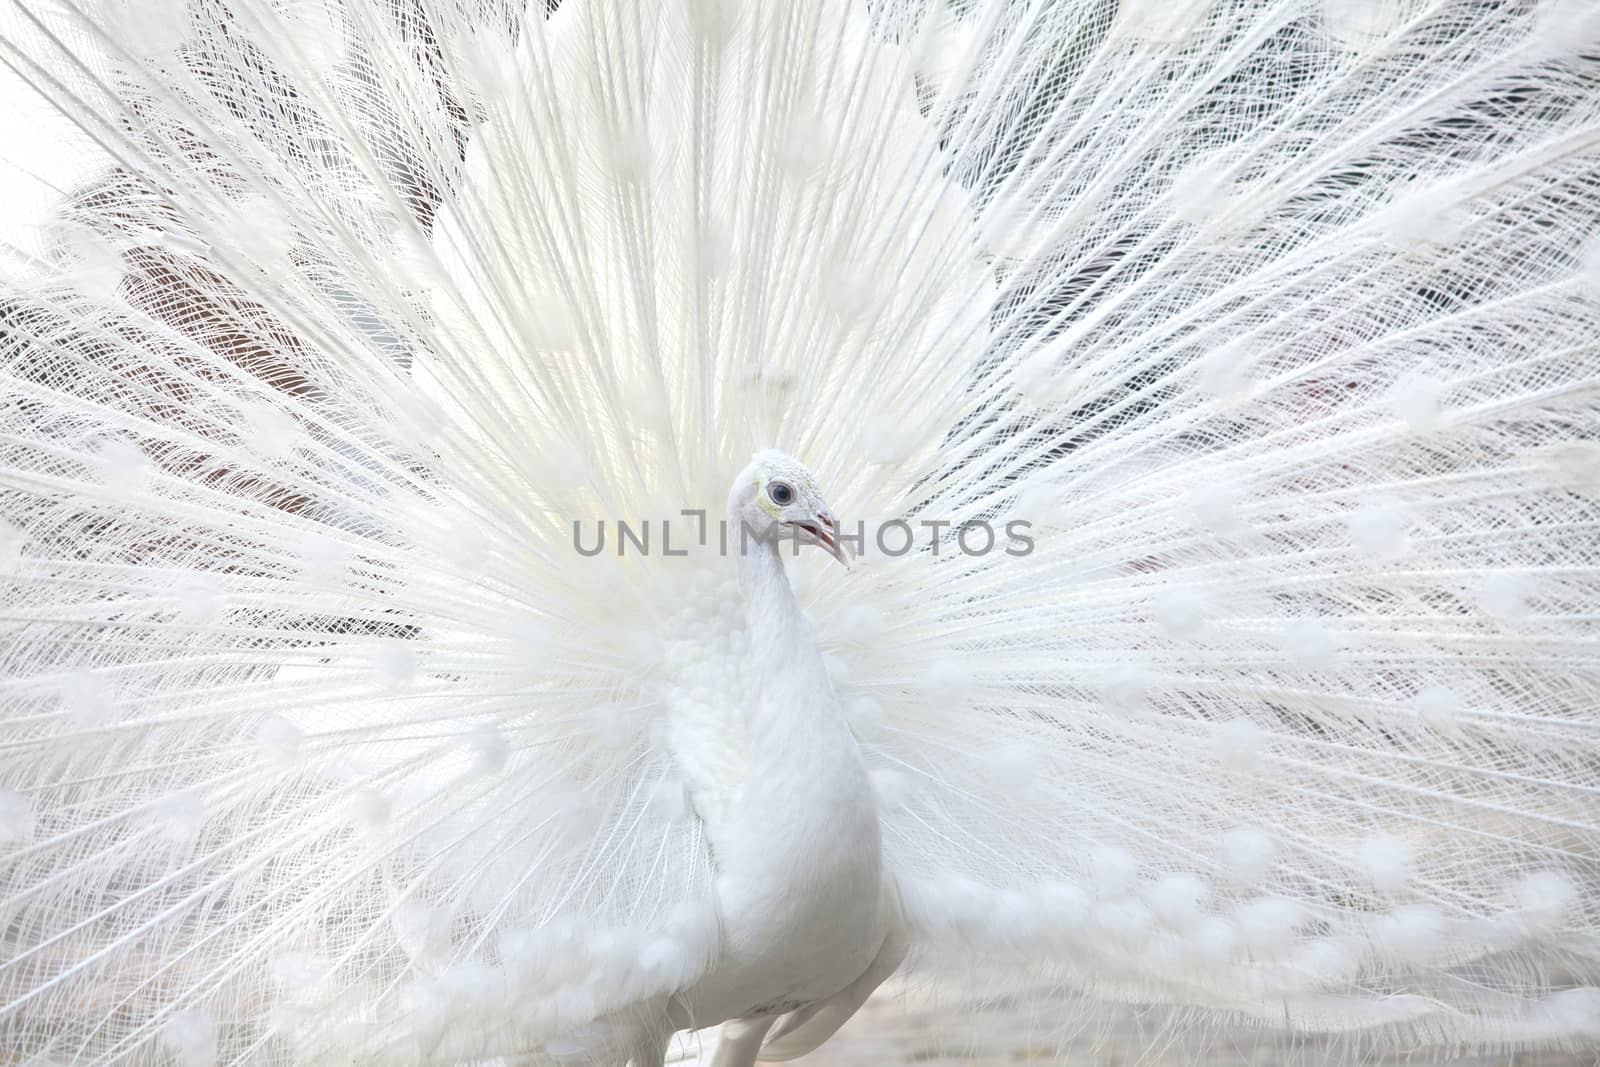 Portrait Of White Peacock During Courtship Display